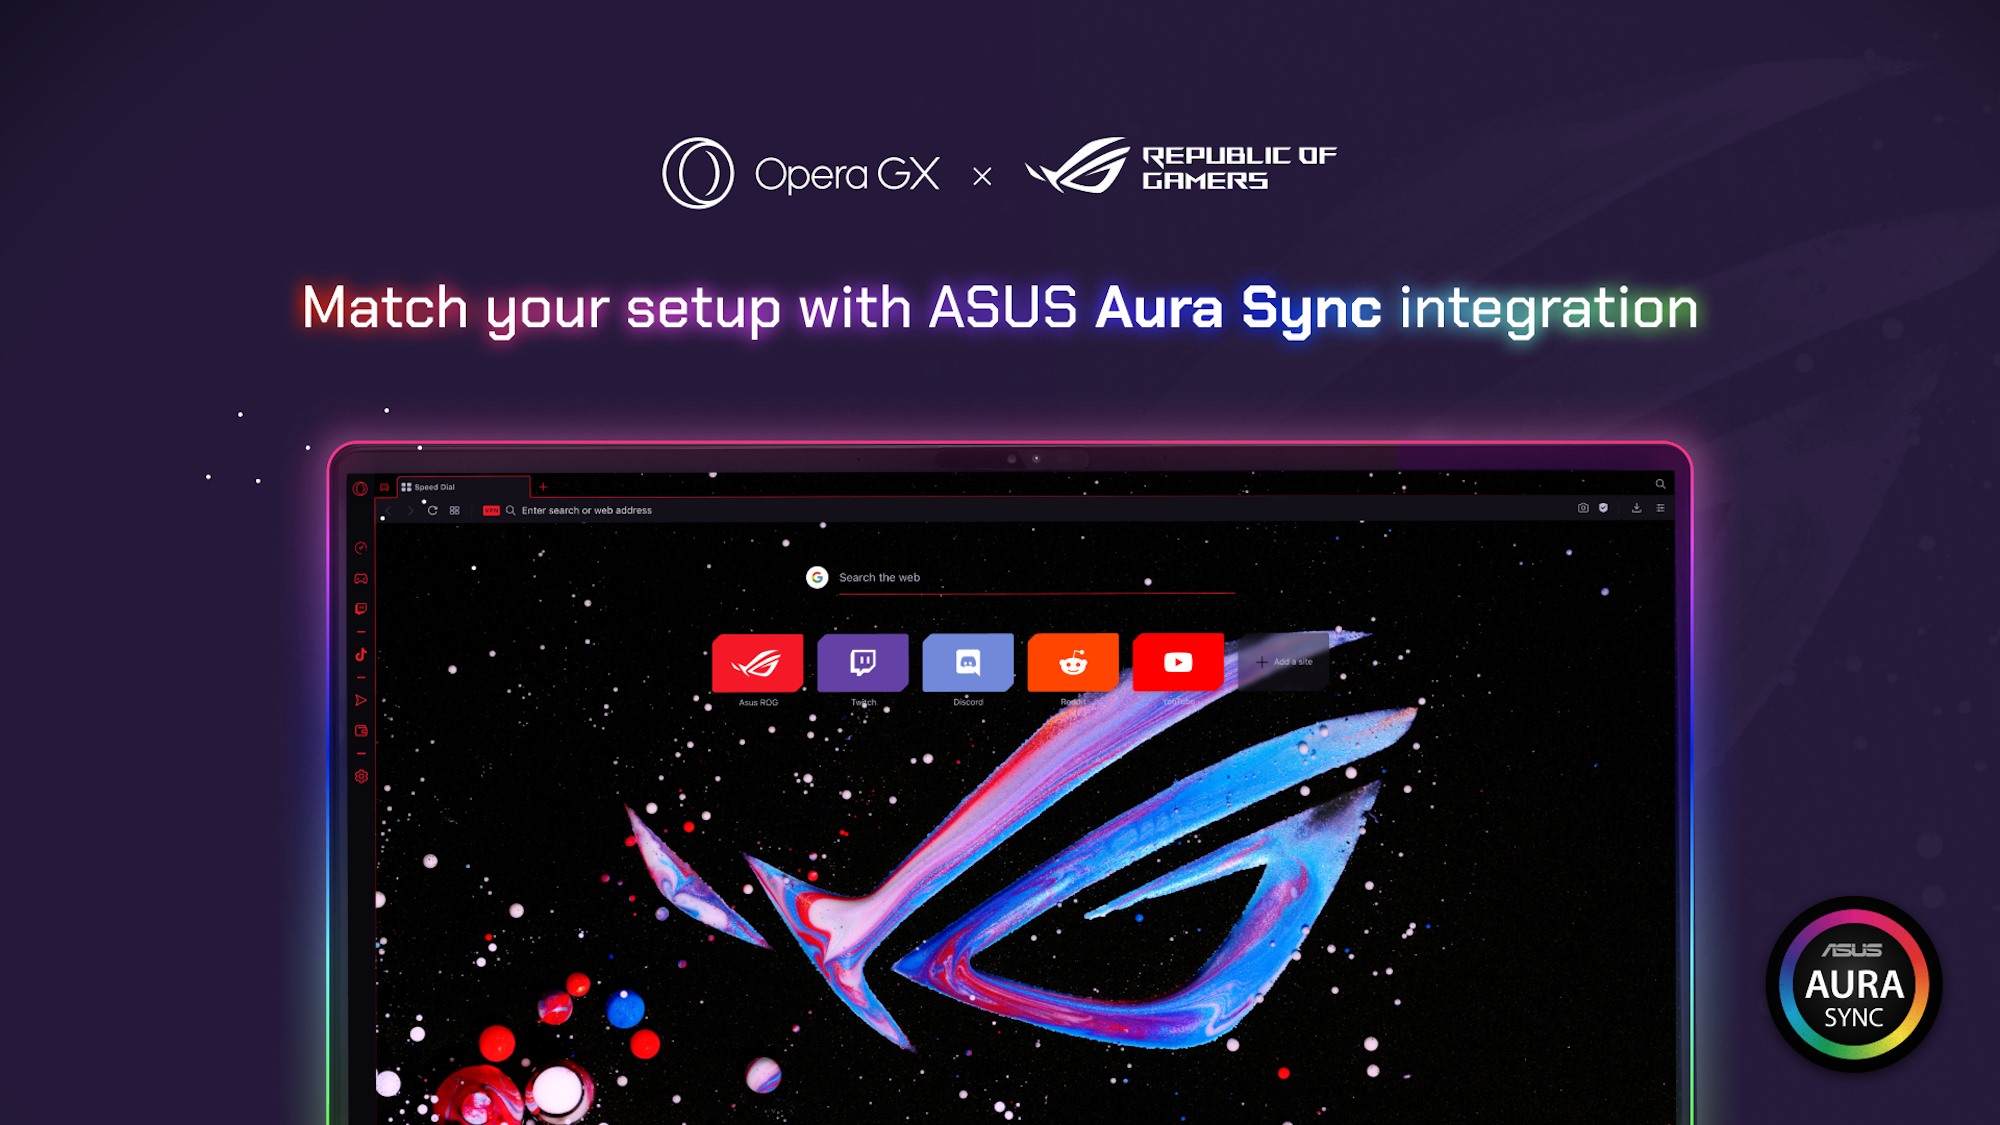 An infographic showing that you can match your setup with ASUS Aura Sync integration